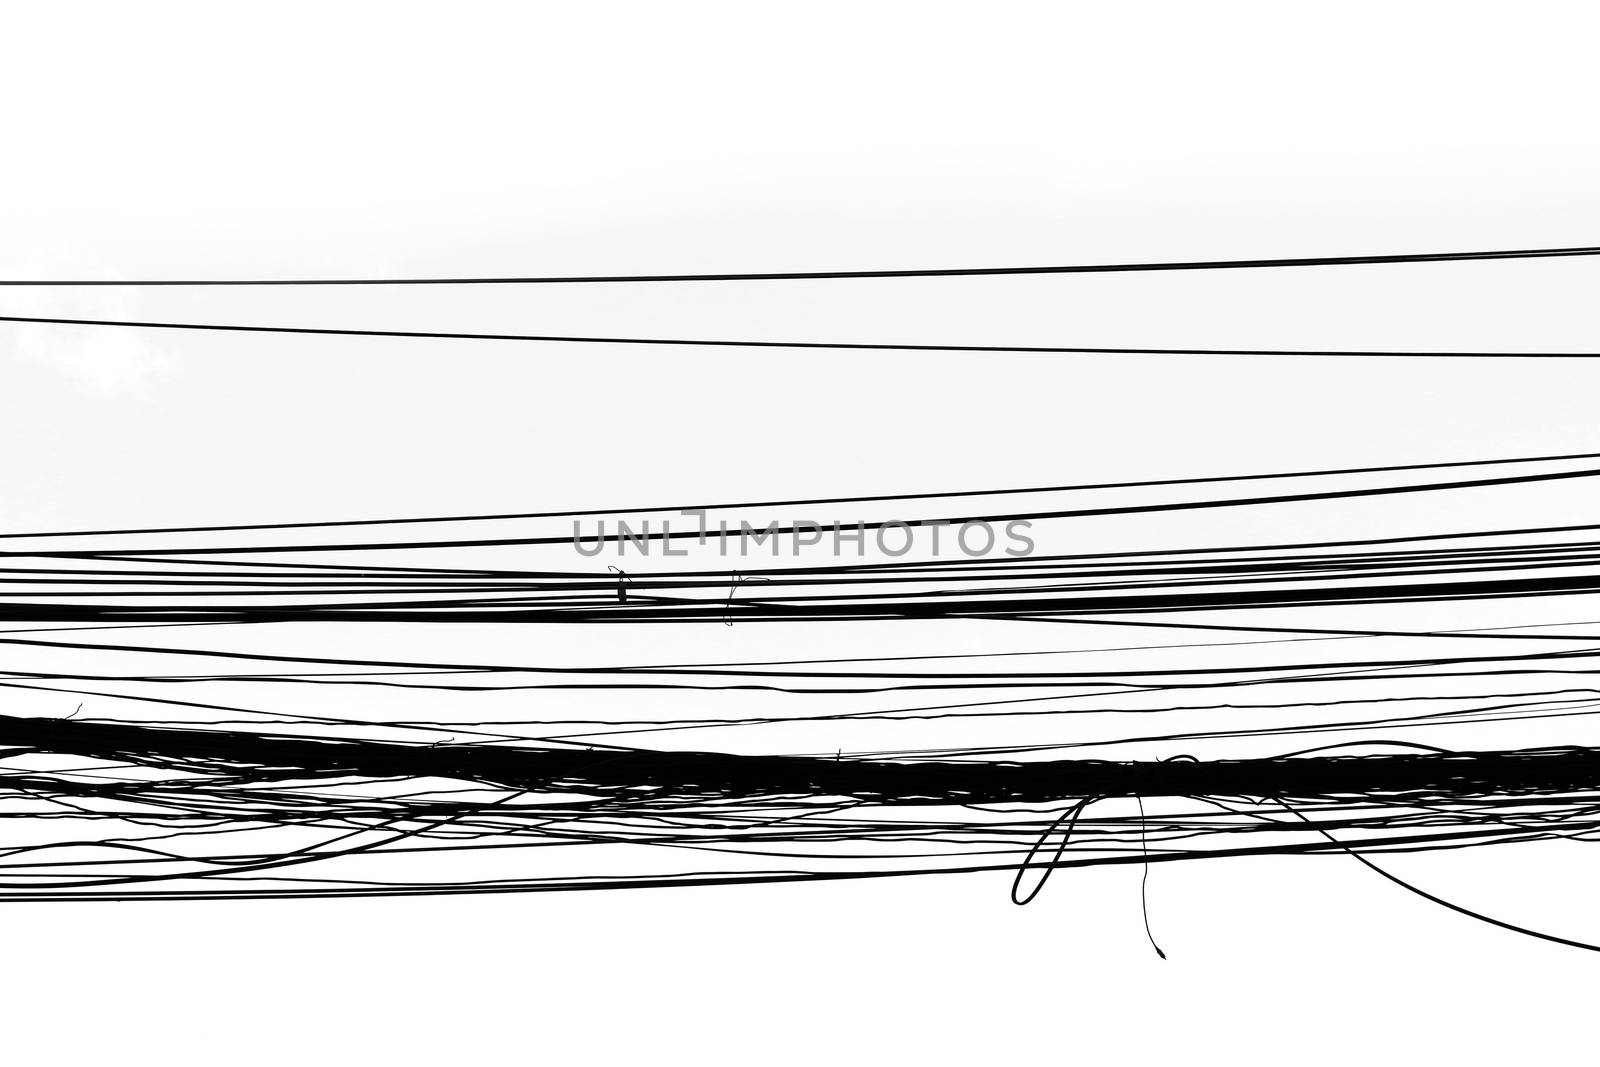 Cable tangled wire, High Voltage Cable tangled wire abstract (Silhouette black white background) by cgdeaw